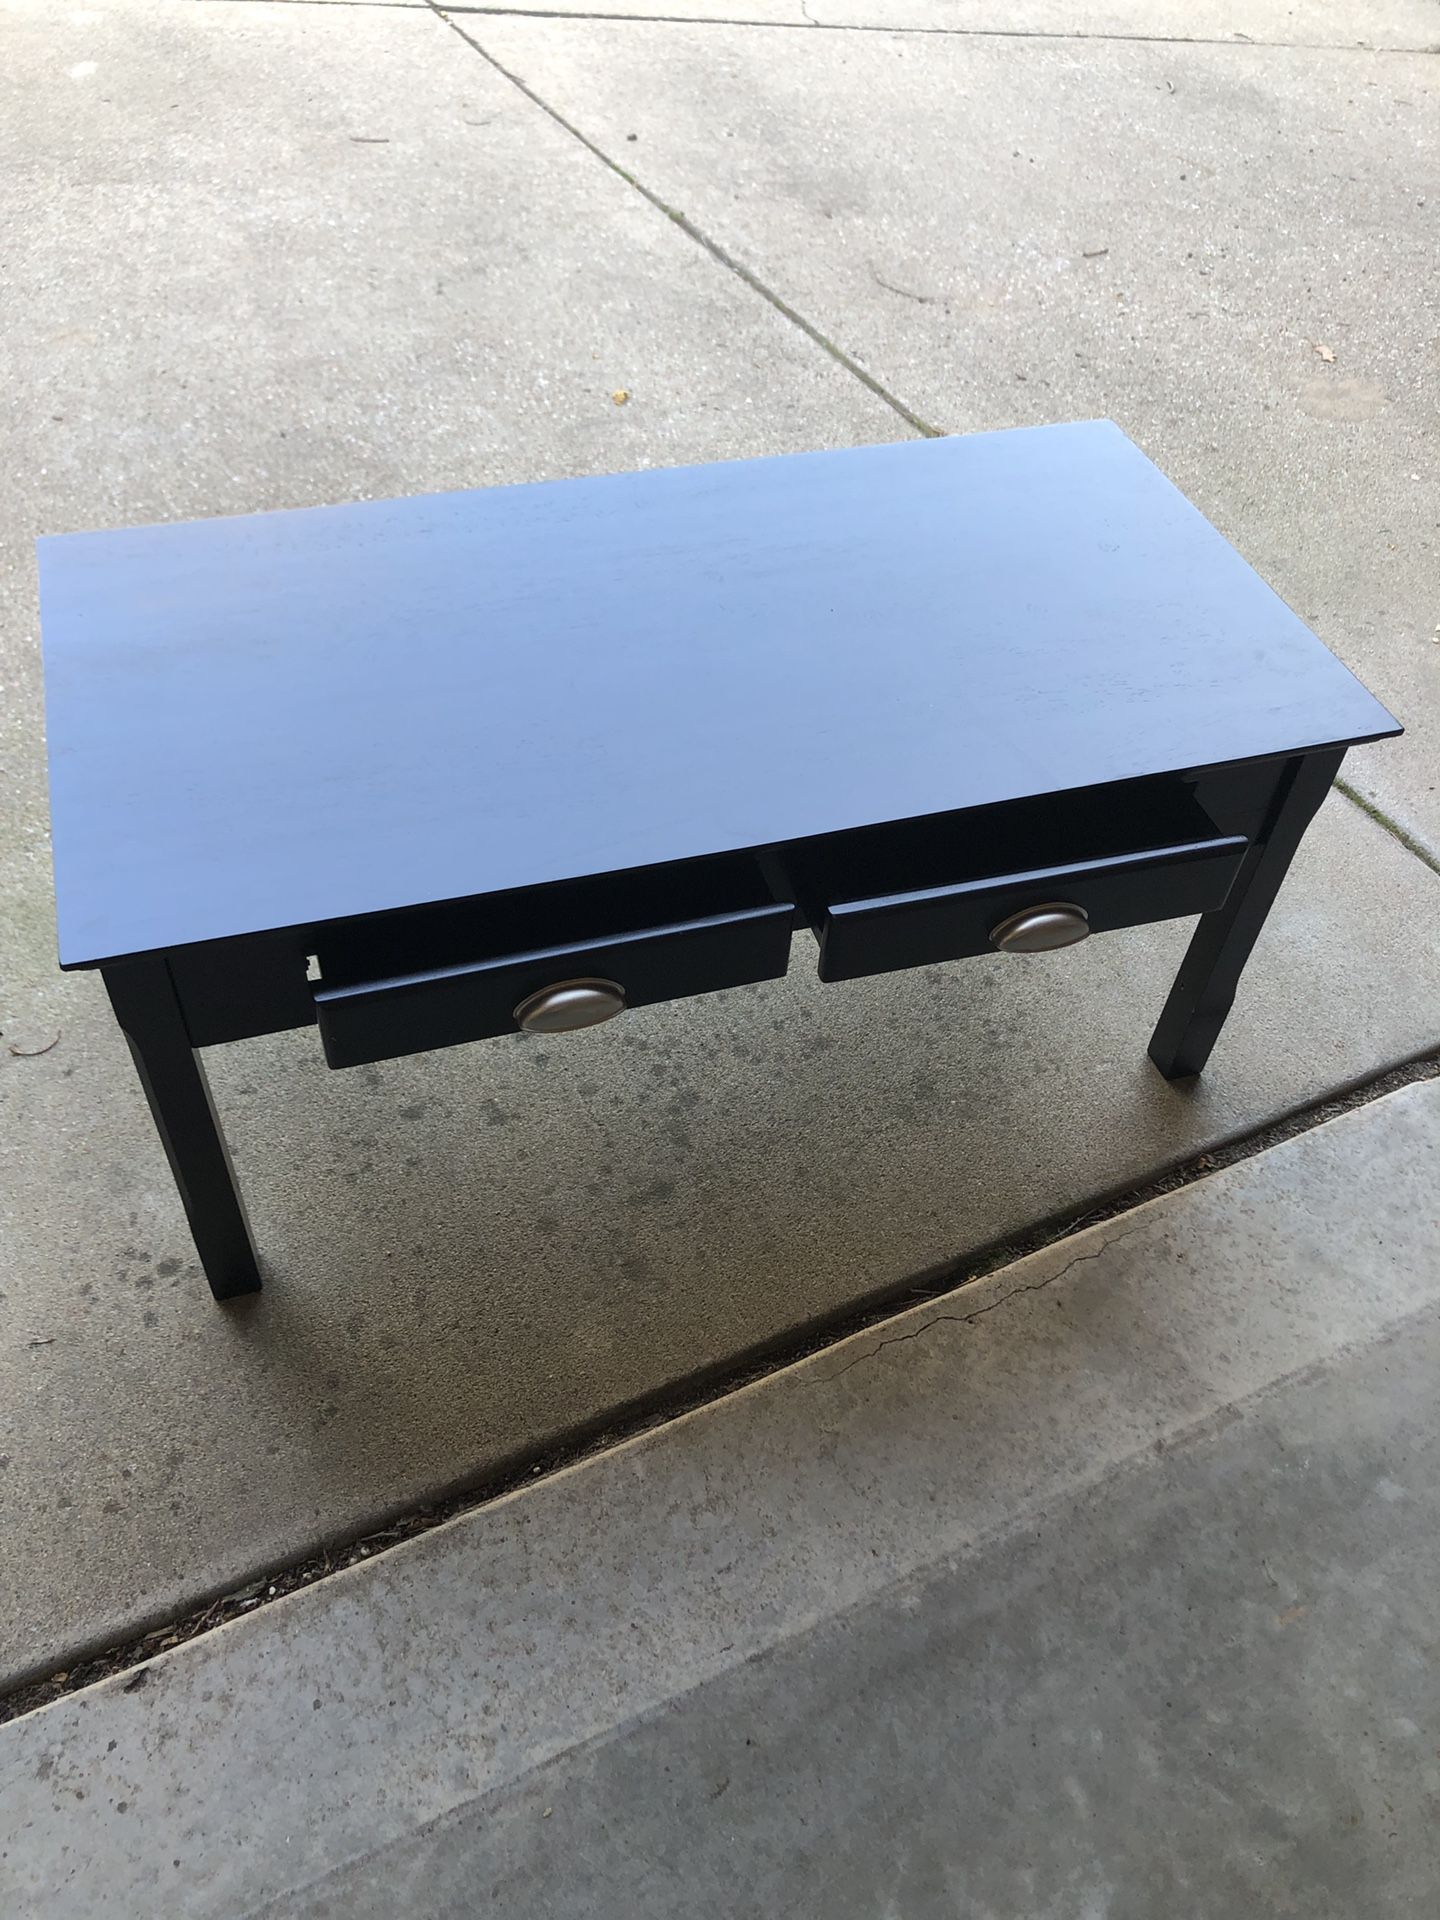 Back coffee table. 38 inches long, 19 inches wide and 17 inches tall. $25, OBO.